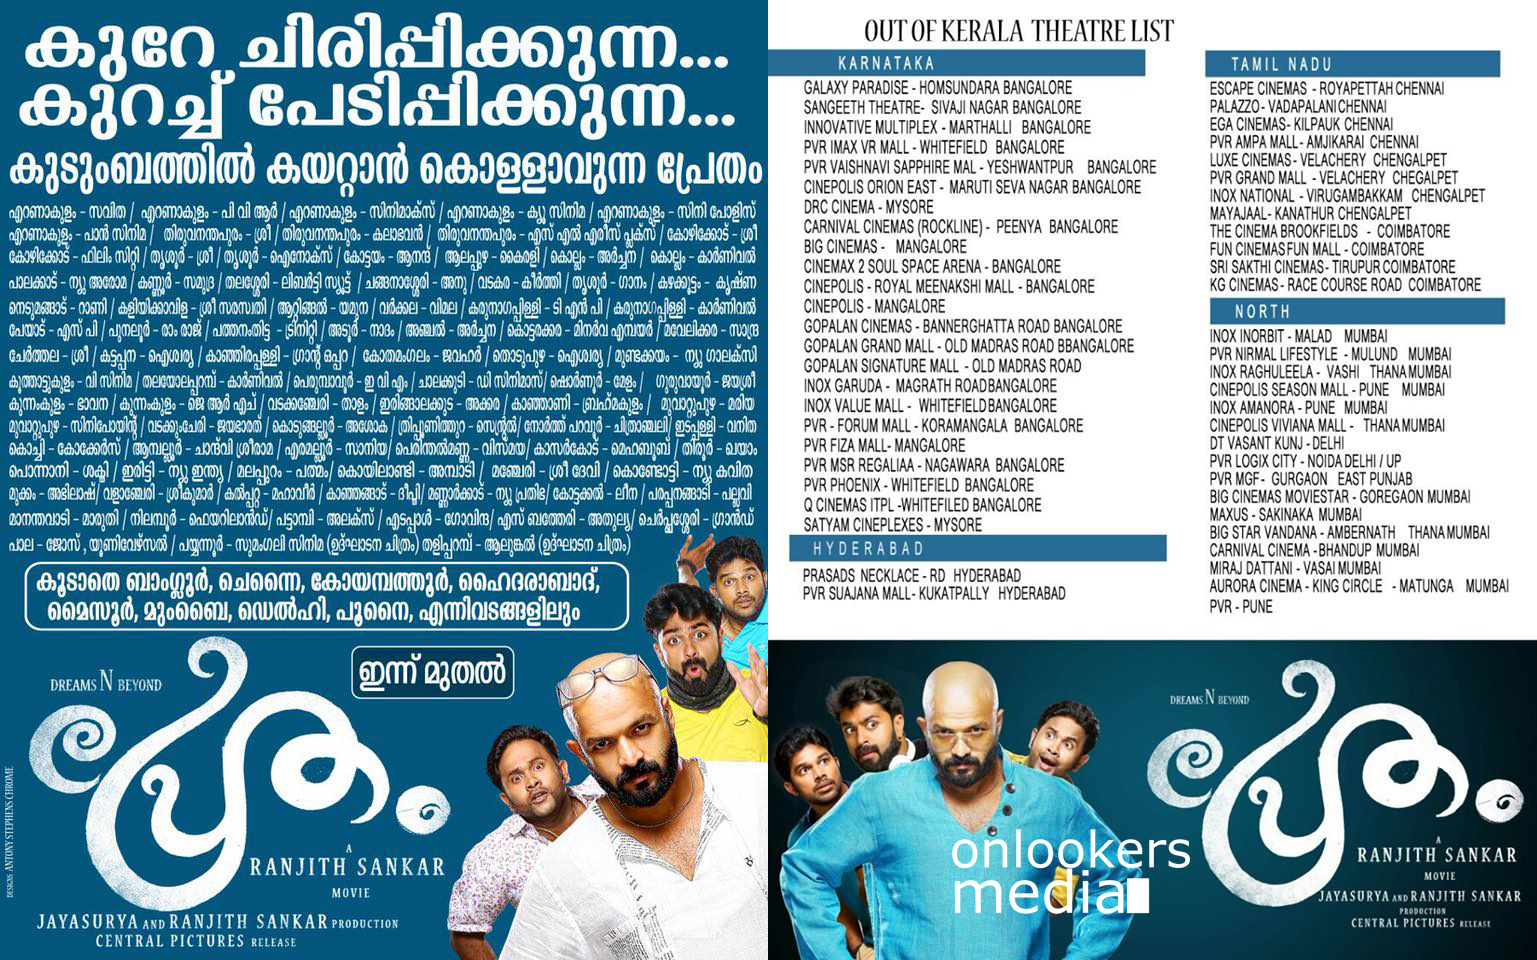 pratham theater list out side kerala